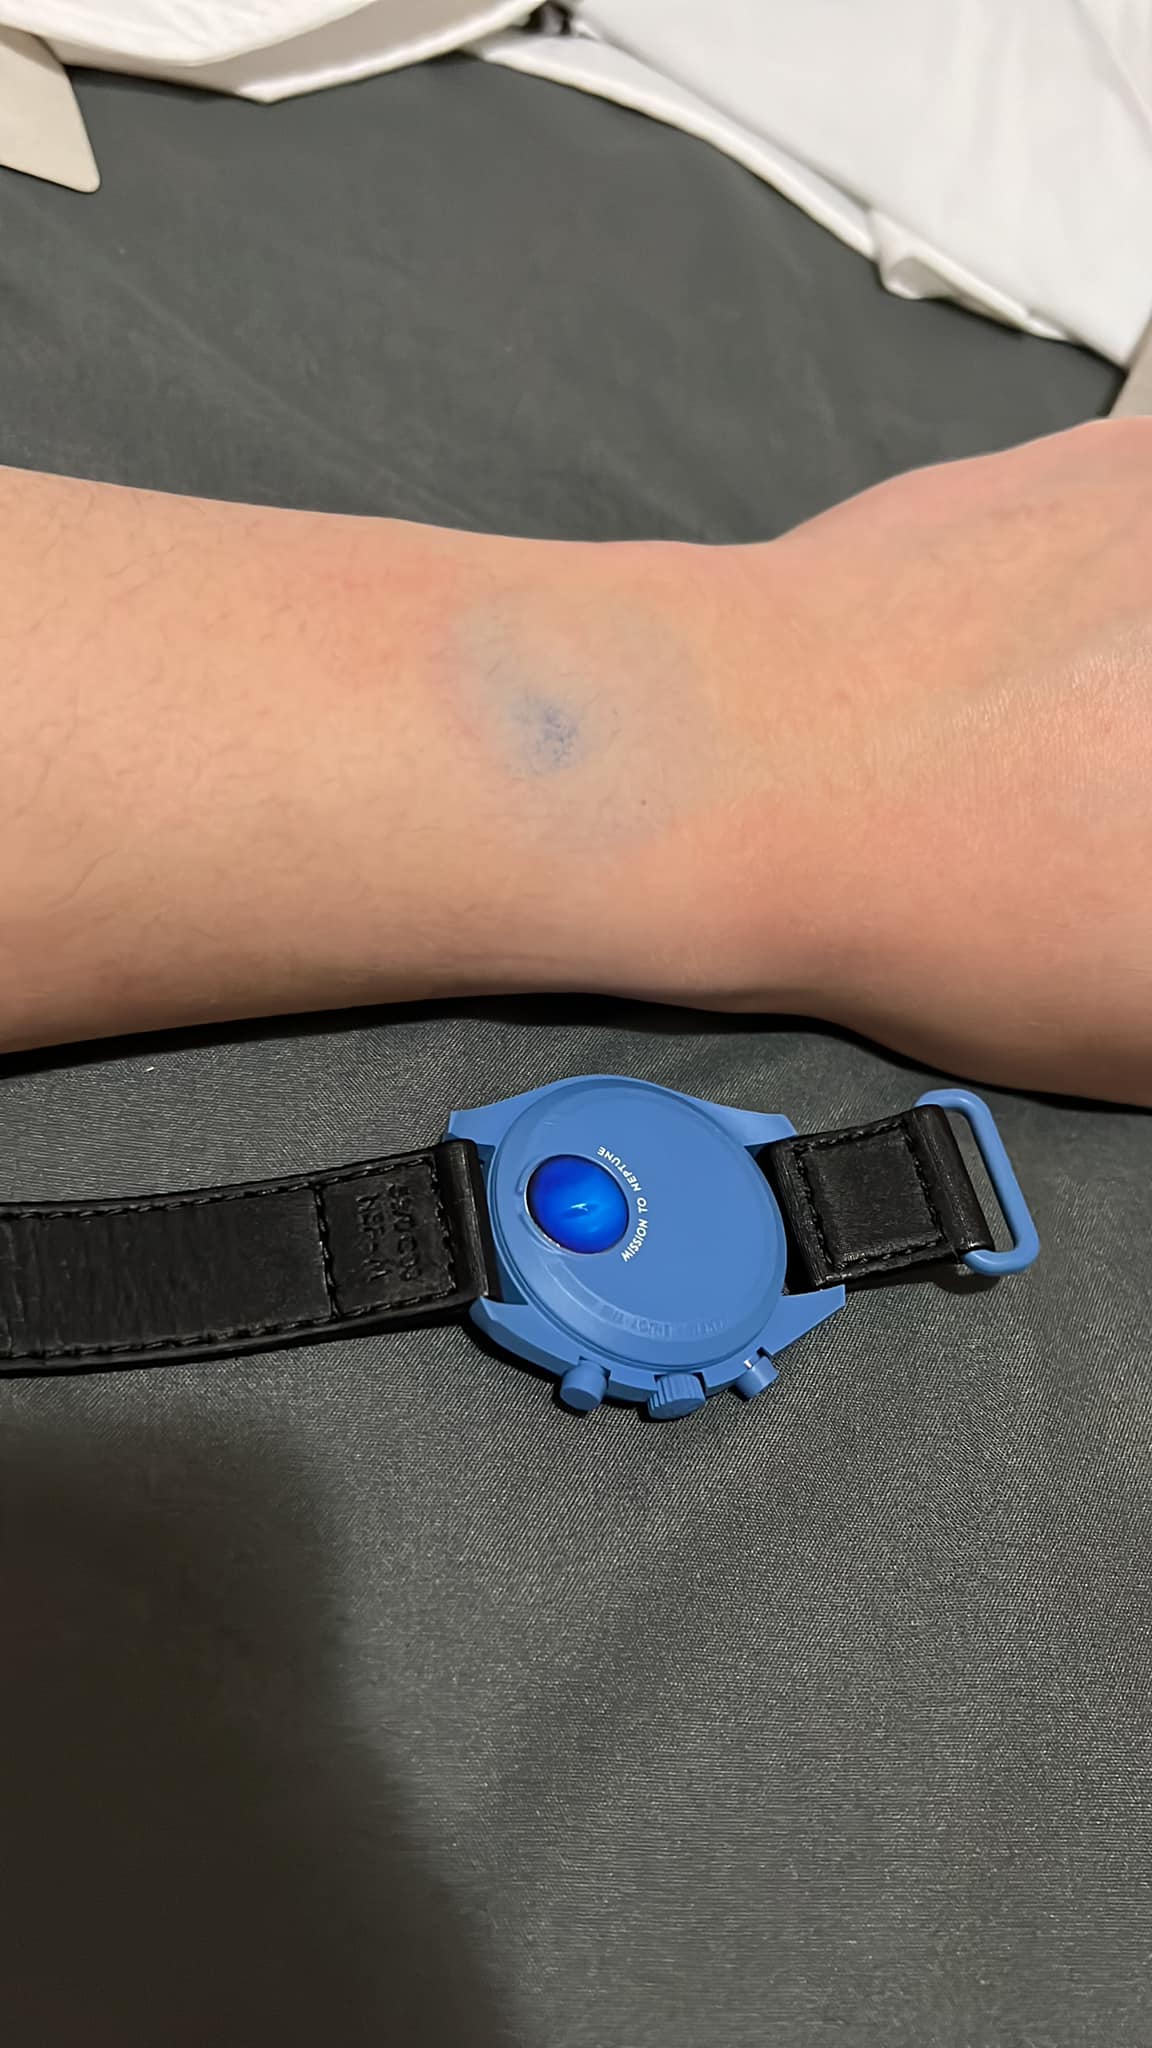 Jeffrey shows how the Swatch x OMEGA MoonSwatch watchcase had left dye transfer on his wrist. Source: Jeffrey So